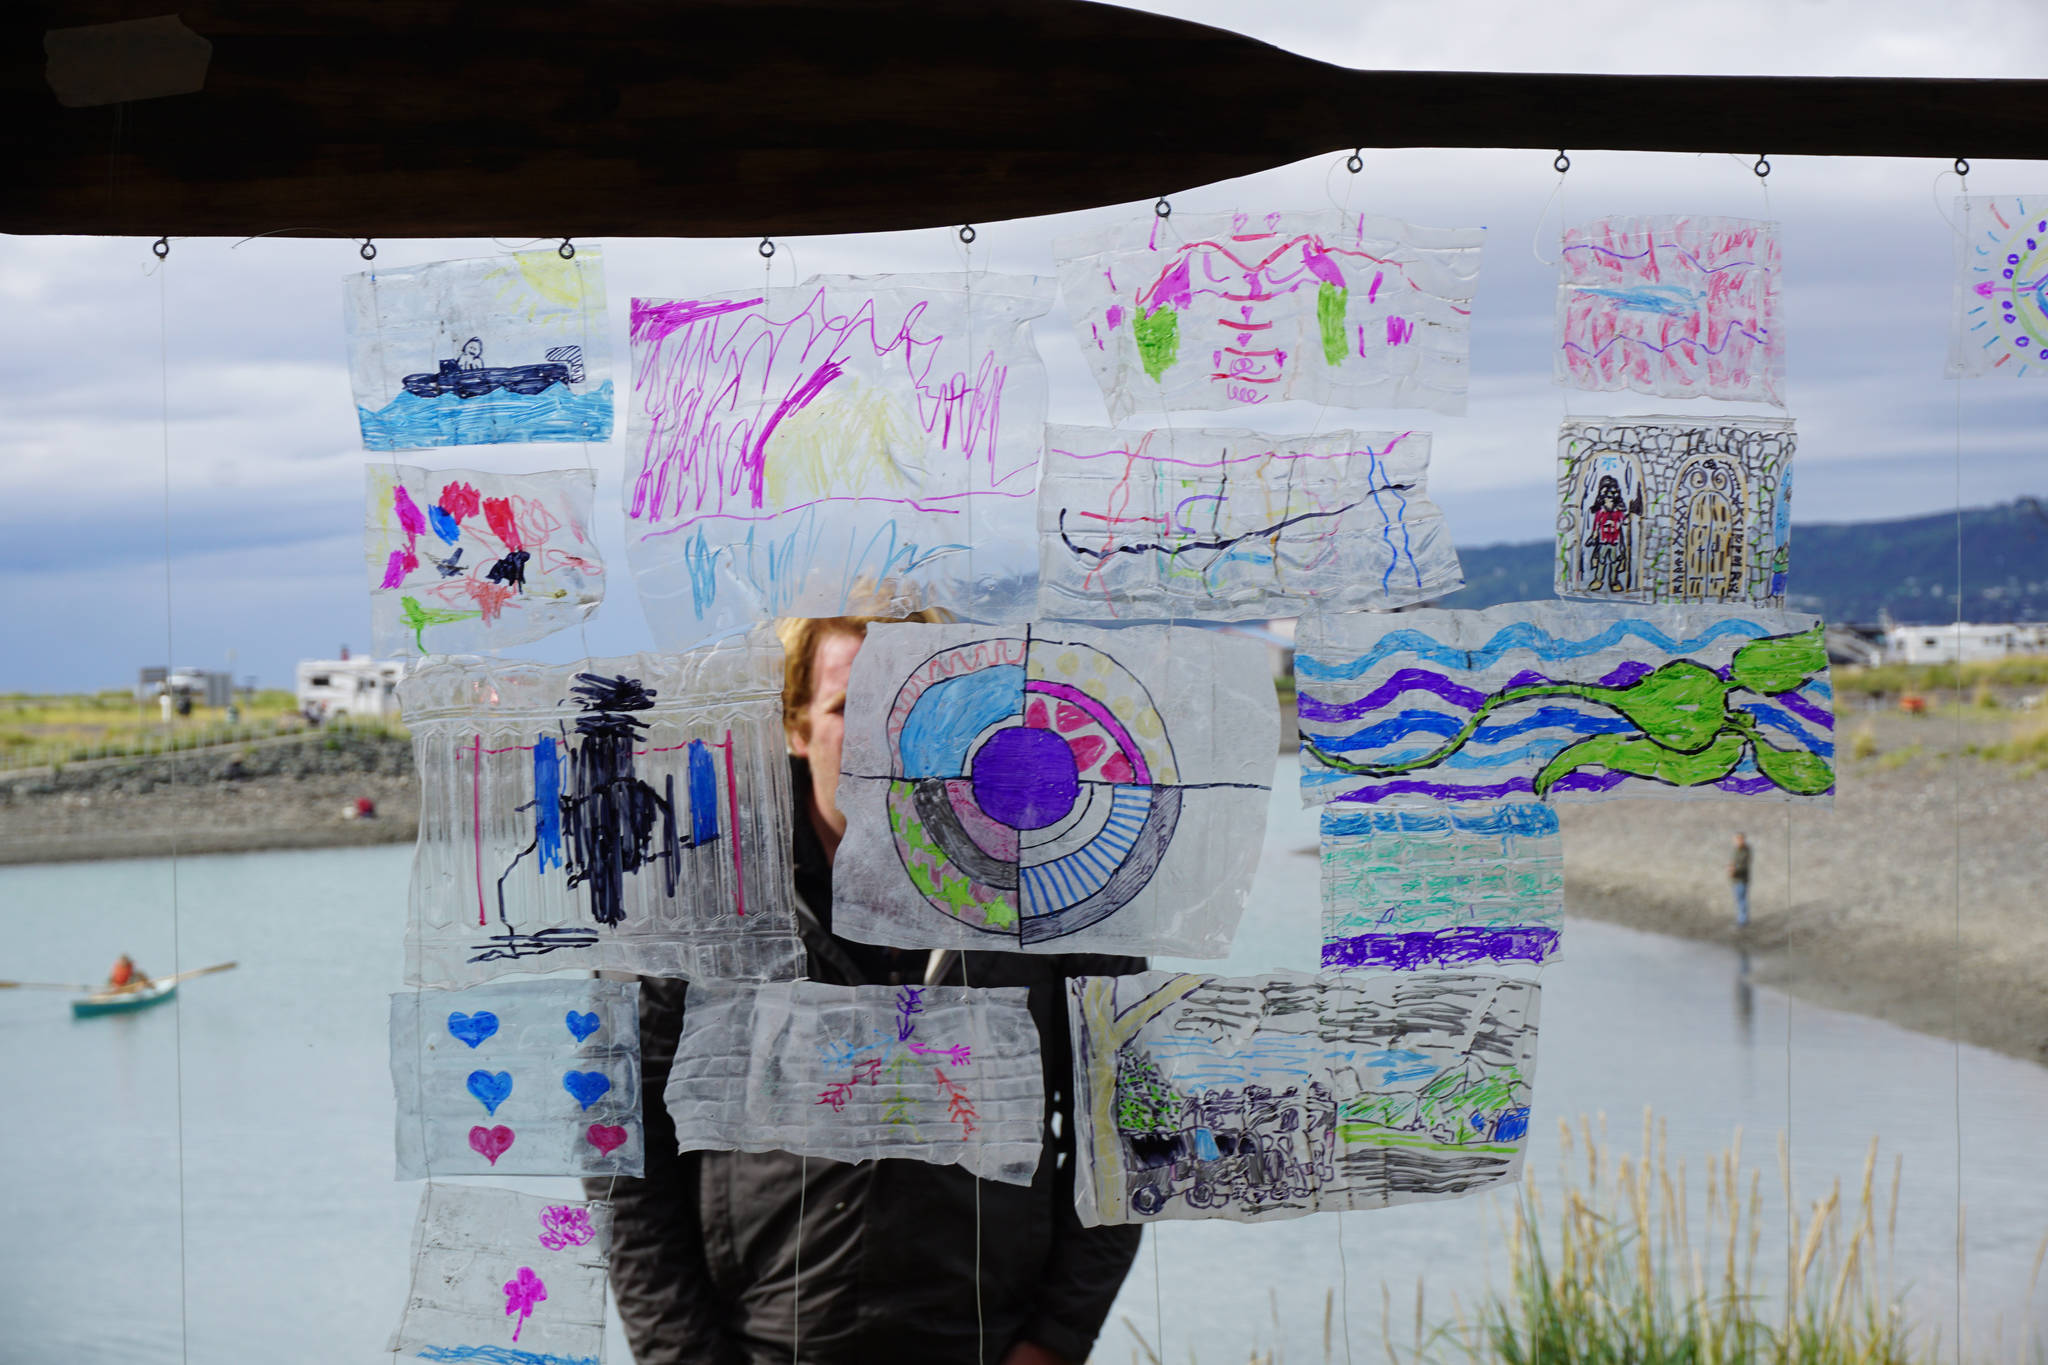 Henry Rieske of the Center for Alaskan Coastal Studies stands behind a mosaic at the Kachemak Bay Wooden Boat Society Festival on Saturday, Sept. 2, 2017 at the Nick Dudiak Fishing Lagoon campground in Homer, Alaska. Artists were invited to draw on pieces of water bottles found on Augustine Island during a marine debris clean up. (Photo by Michael Armstrong, Homer News)